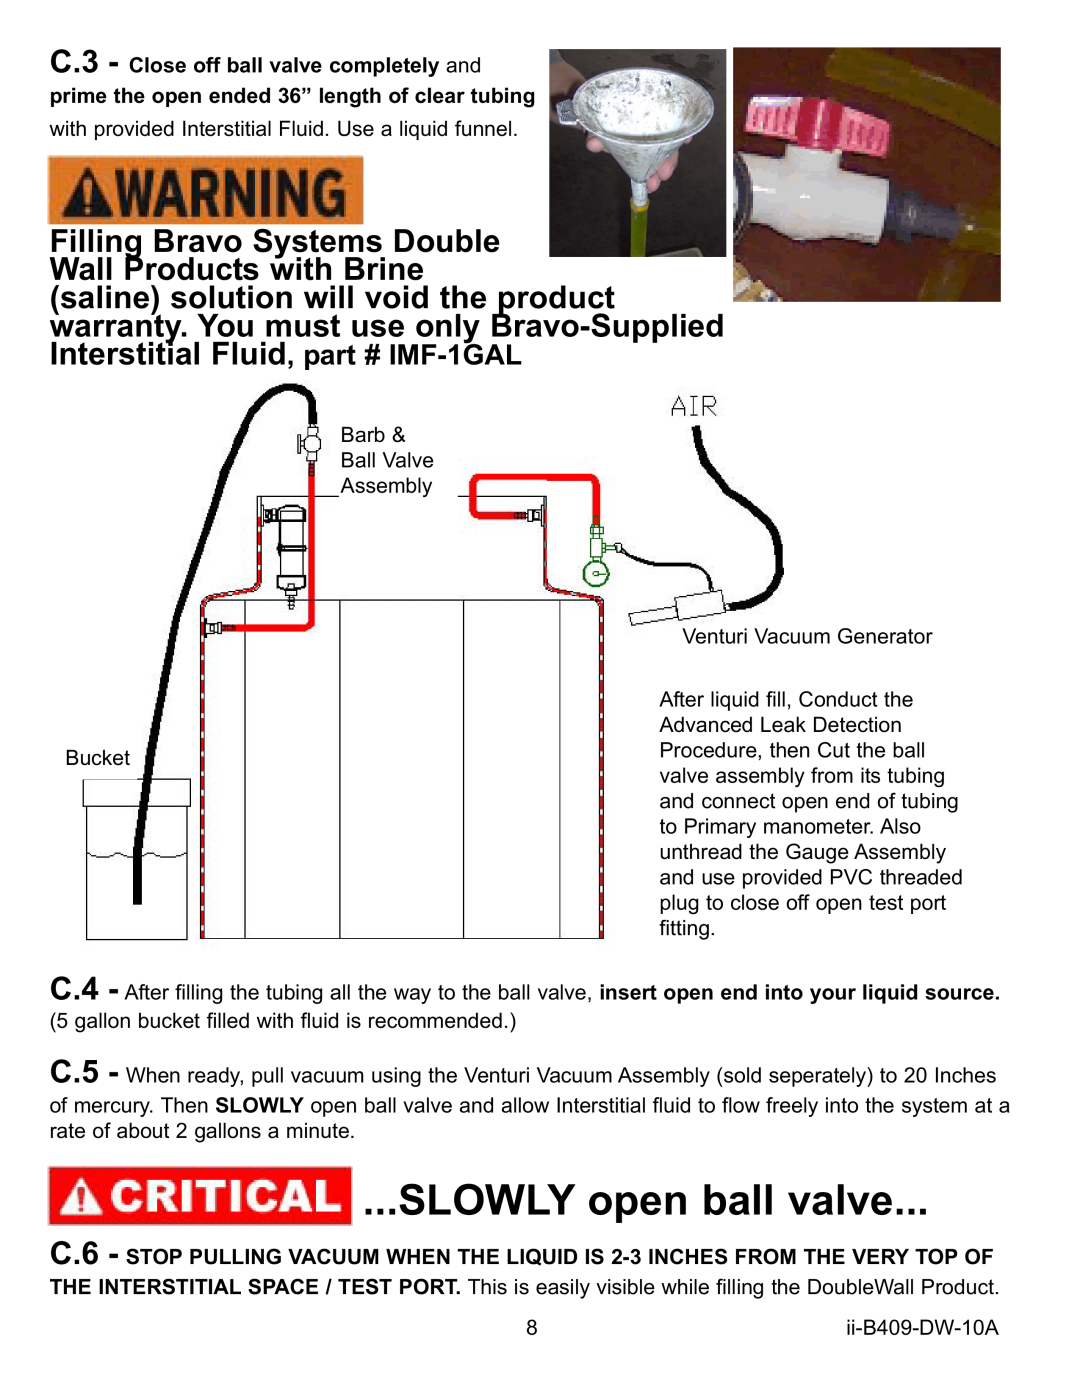 Bravo View B409 installation instructions SLOWLY open ball valve, Filling Bravo Systems Double Wall Products with Brine 